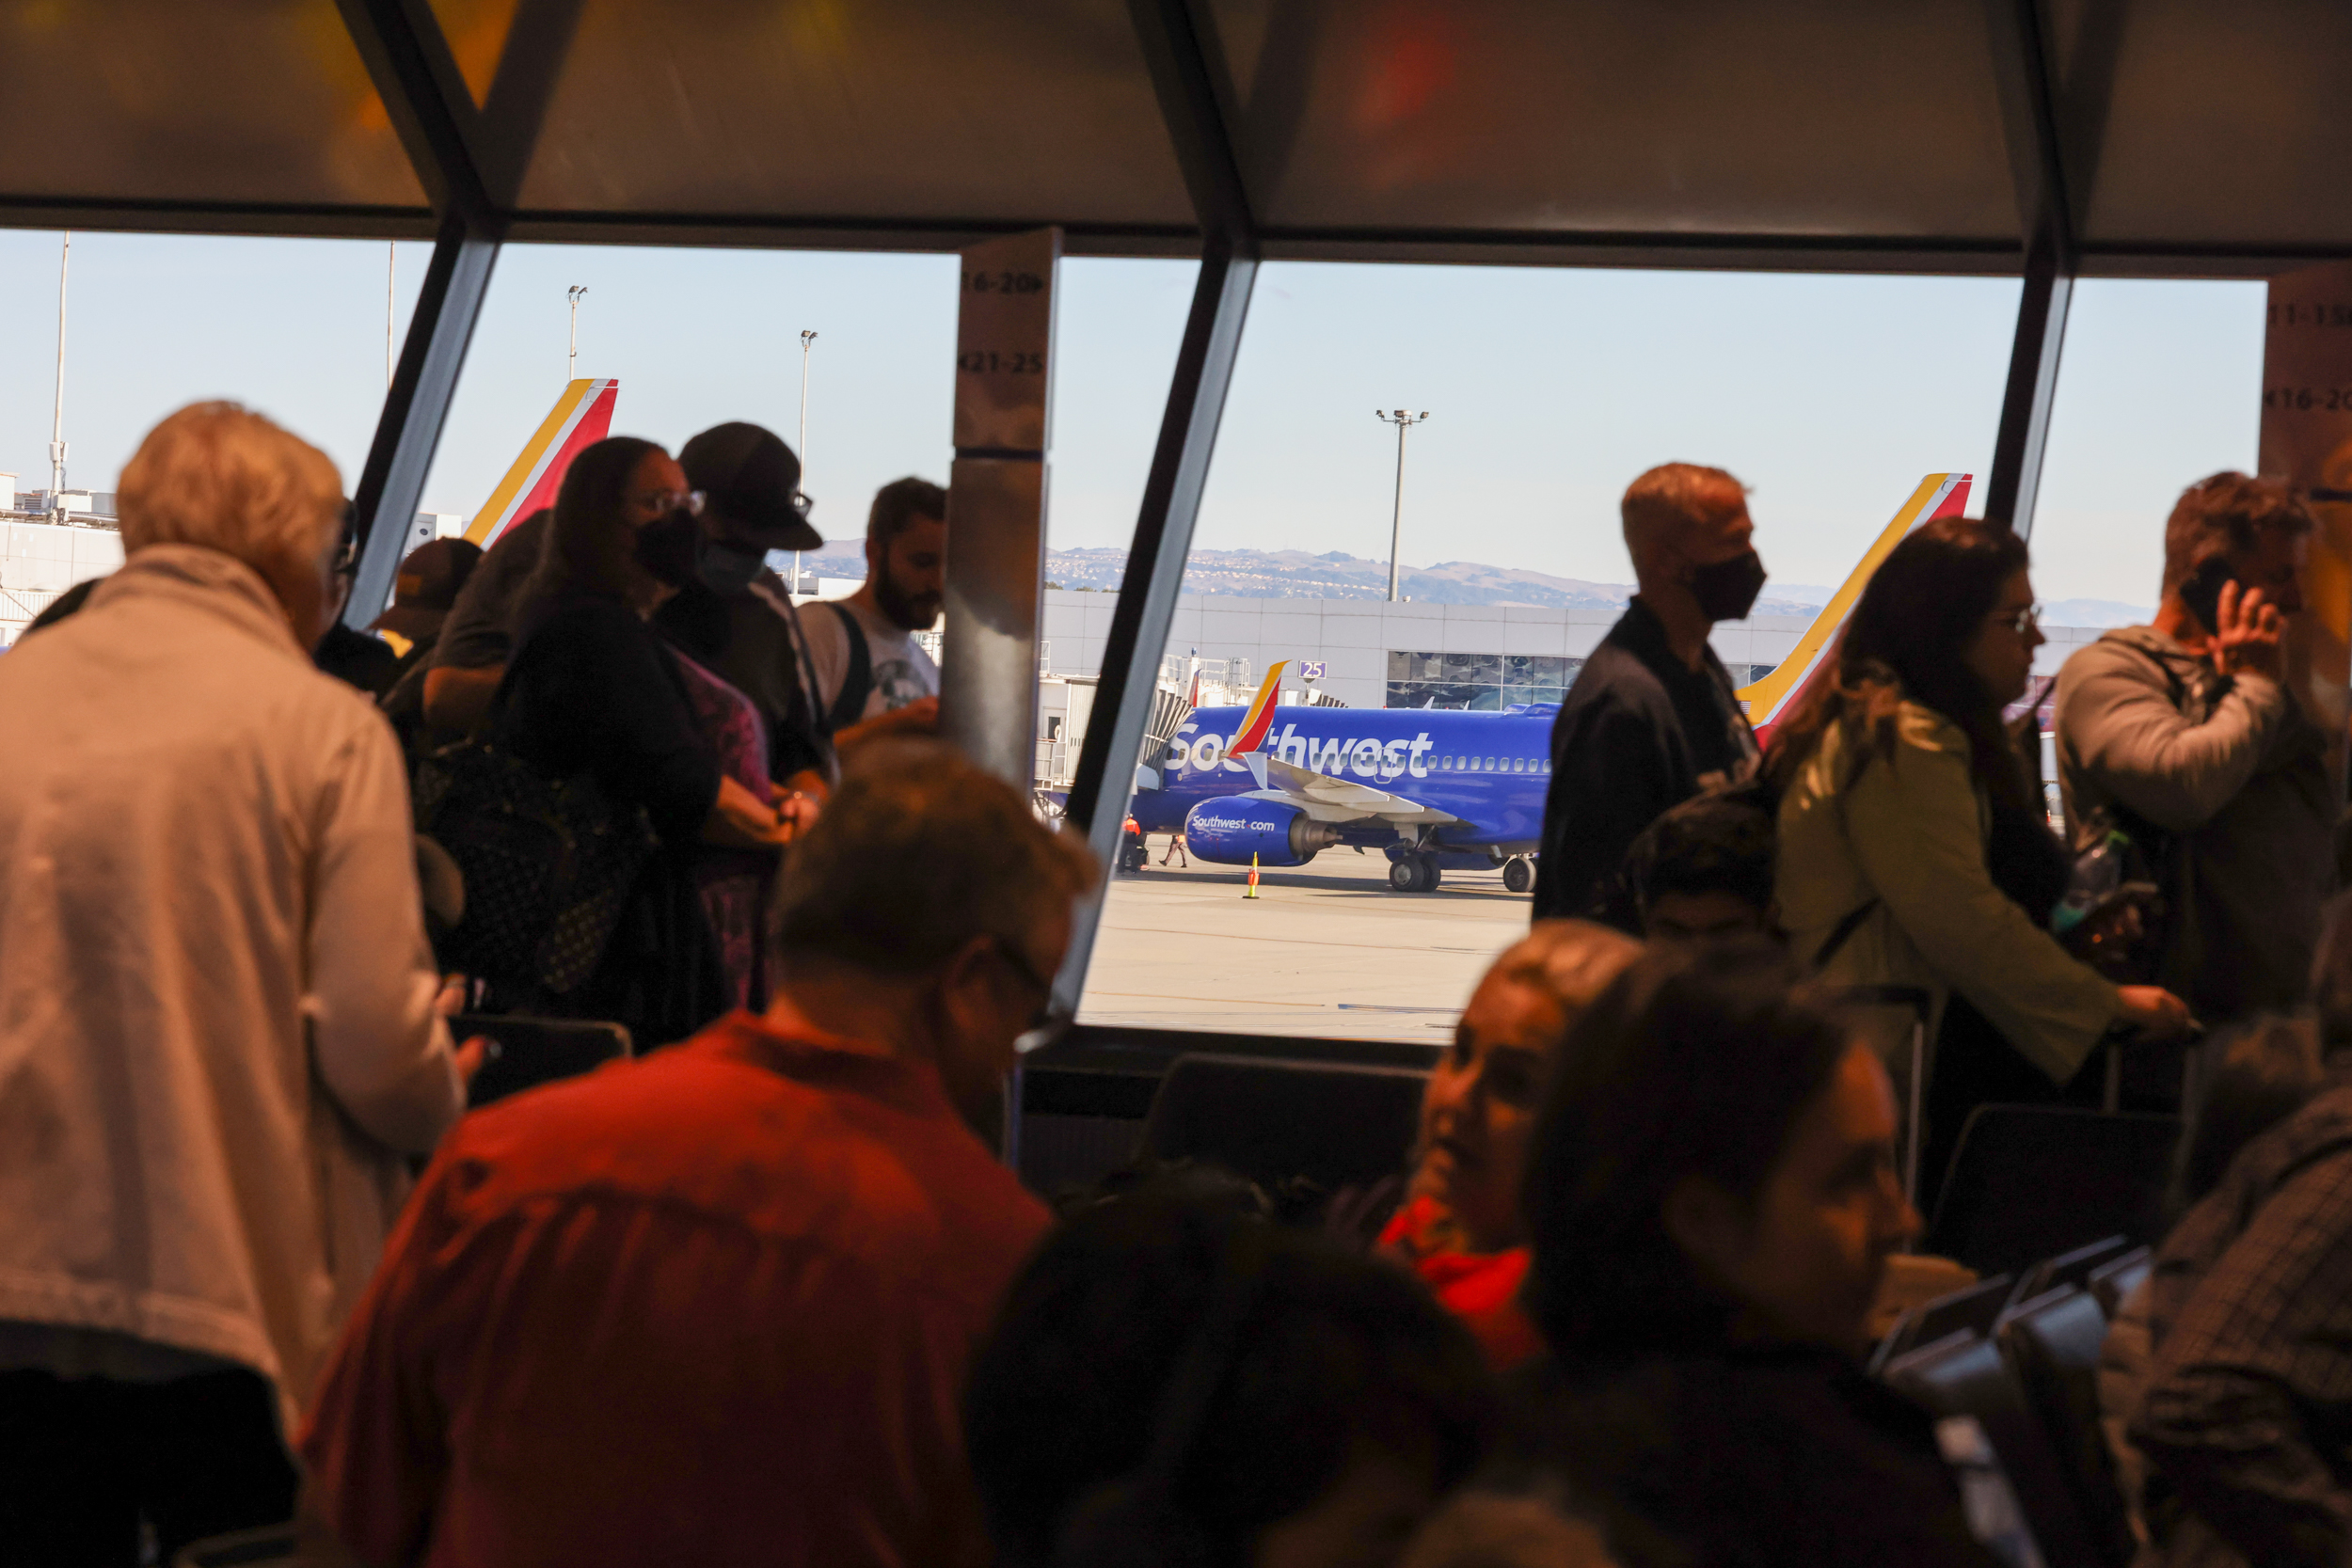 Passengers in a waiting area with a blue airplane outside the window and mountains in the backdrop.